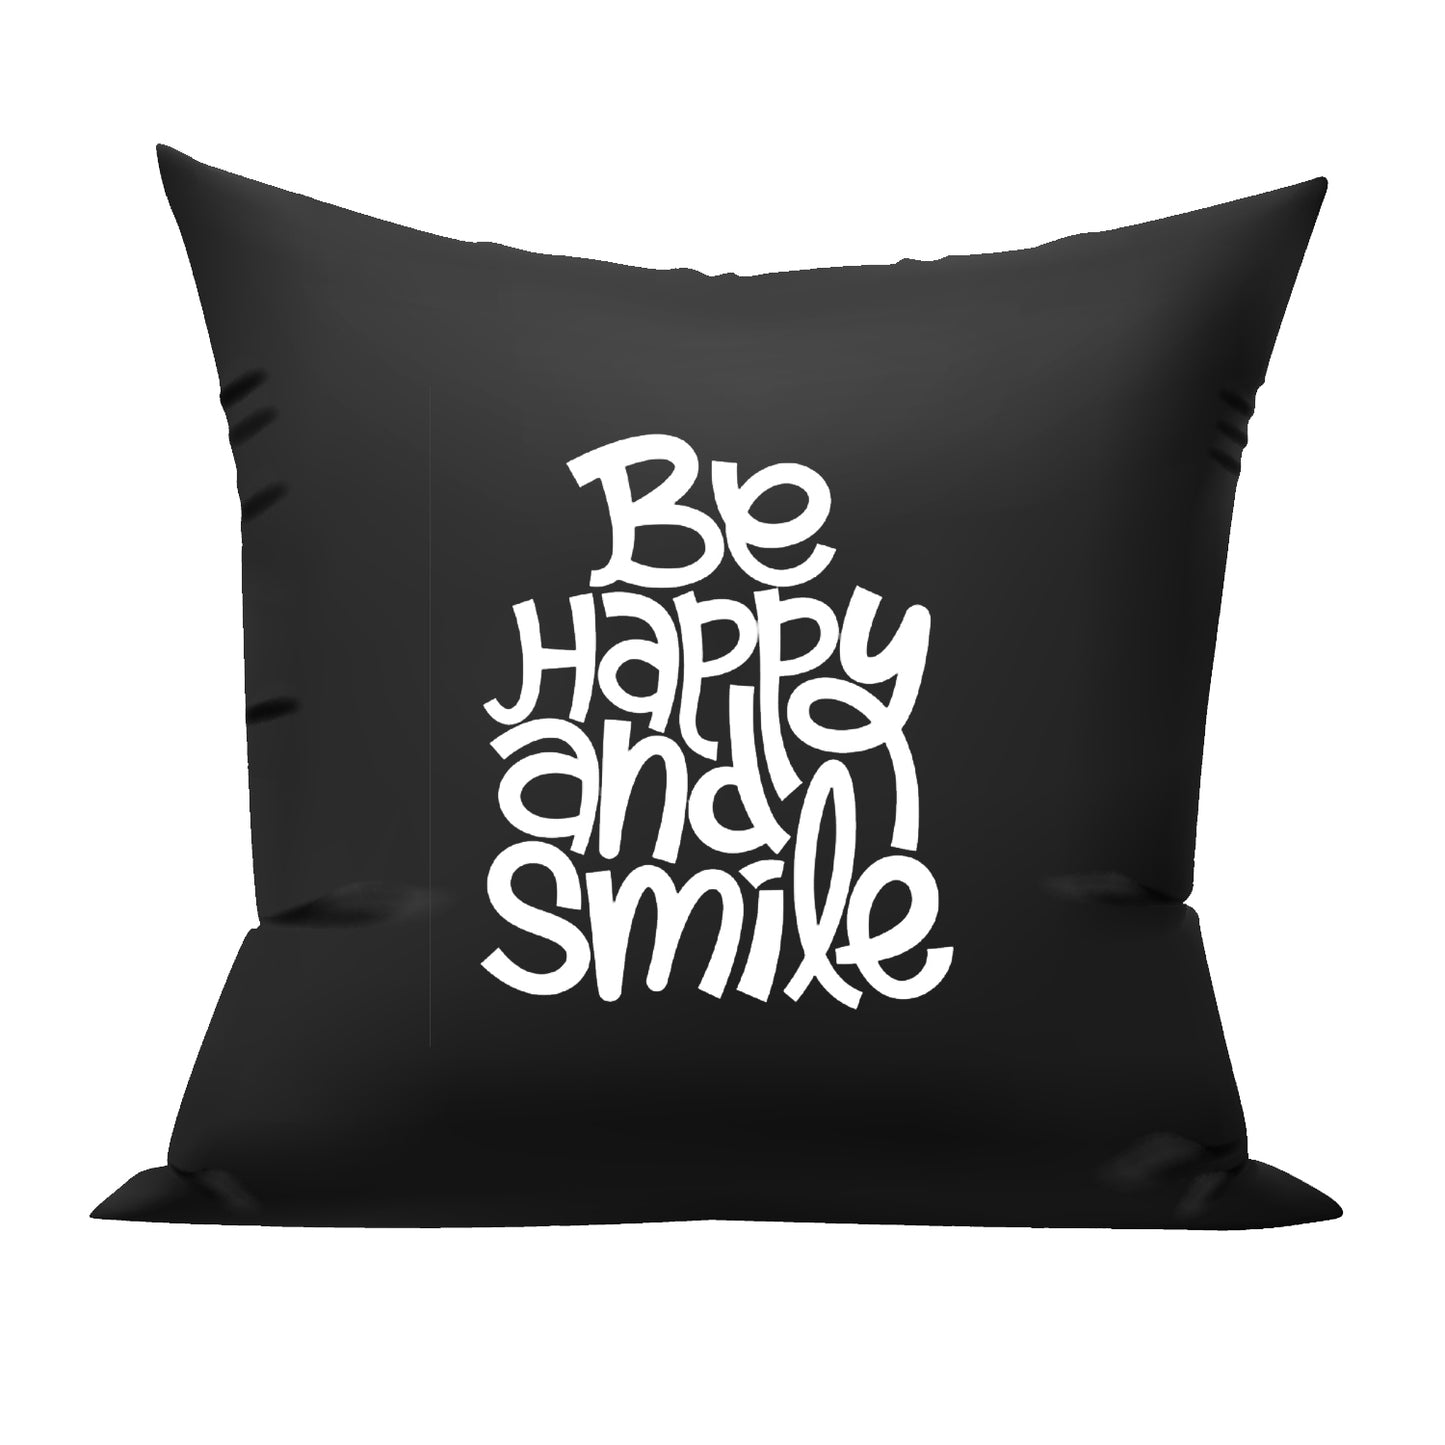 Be happy and smile cushion